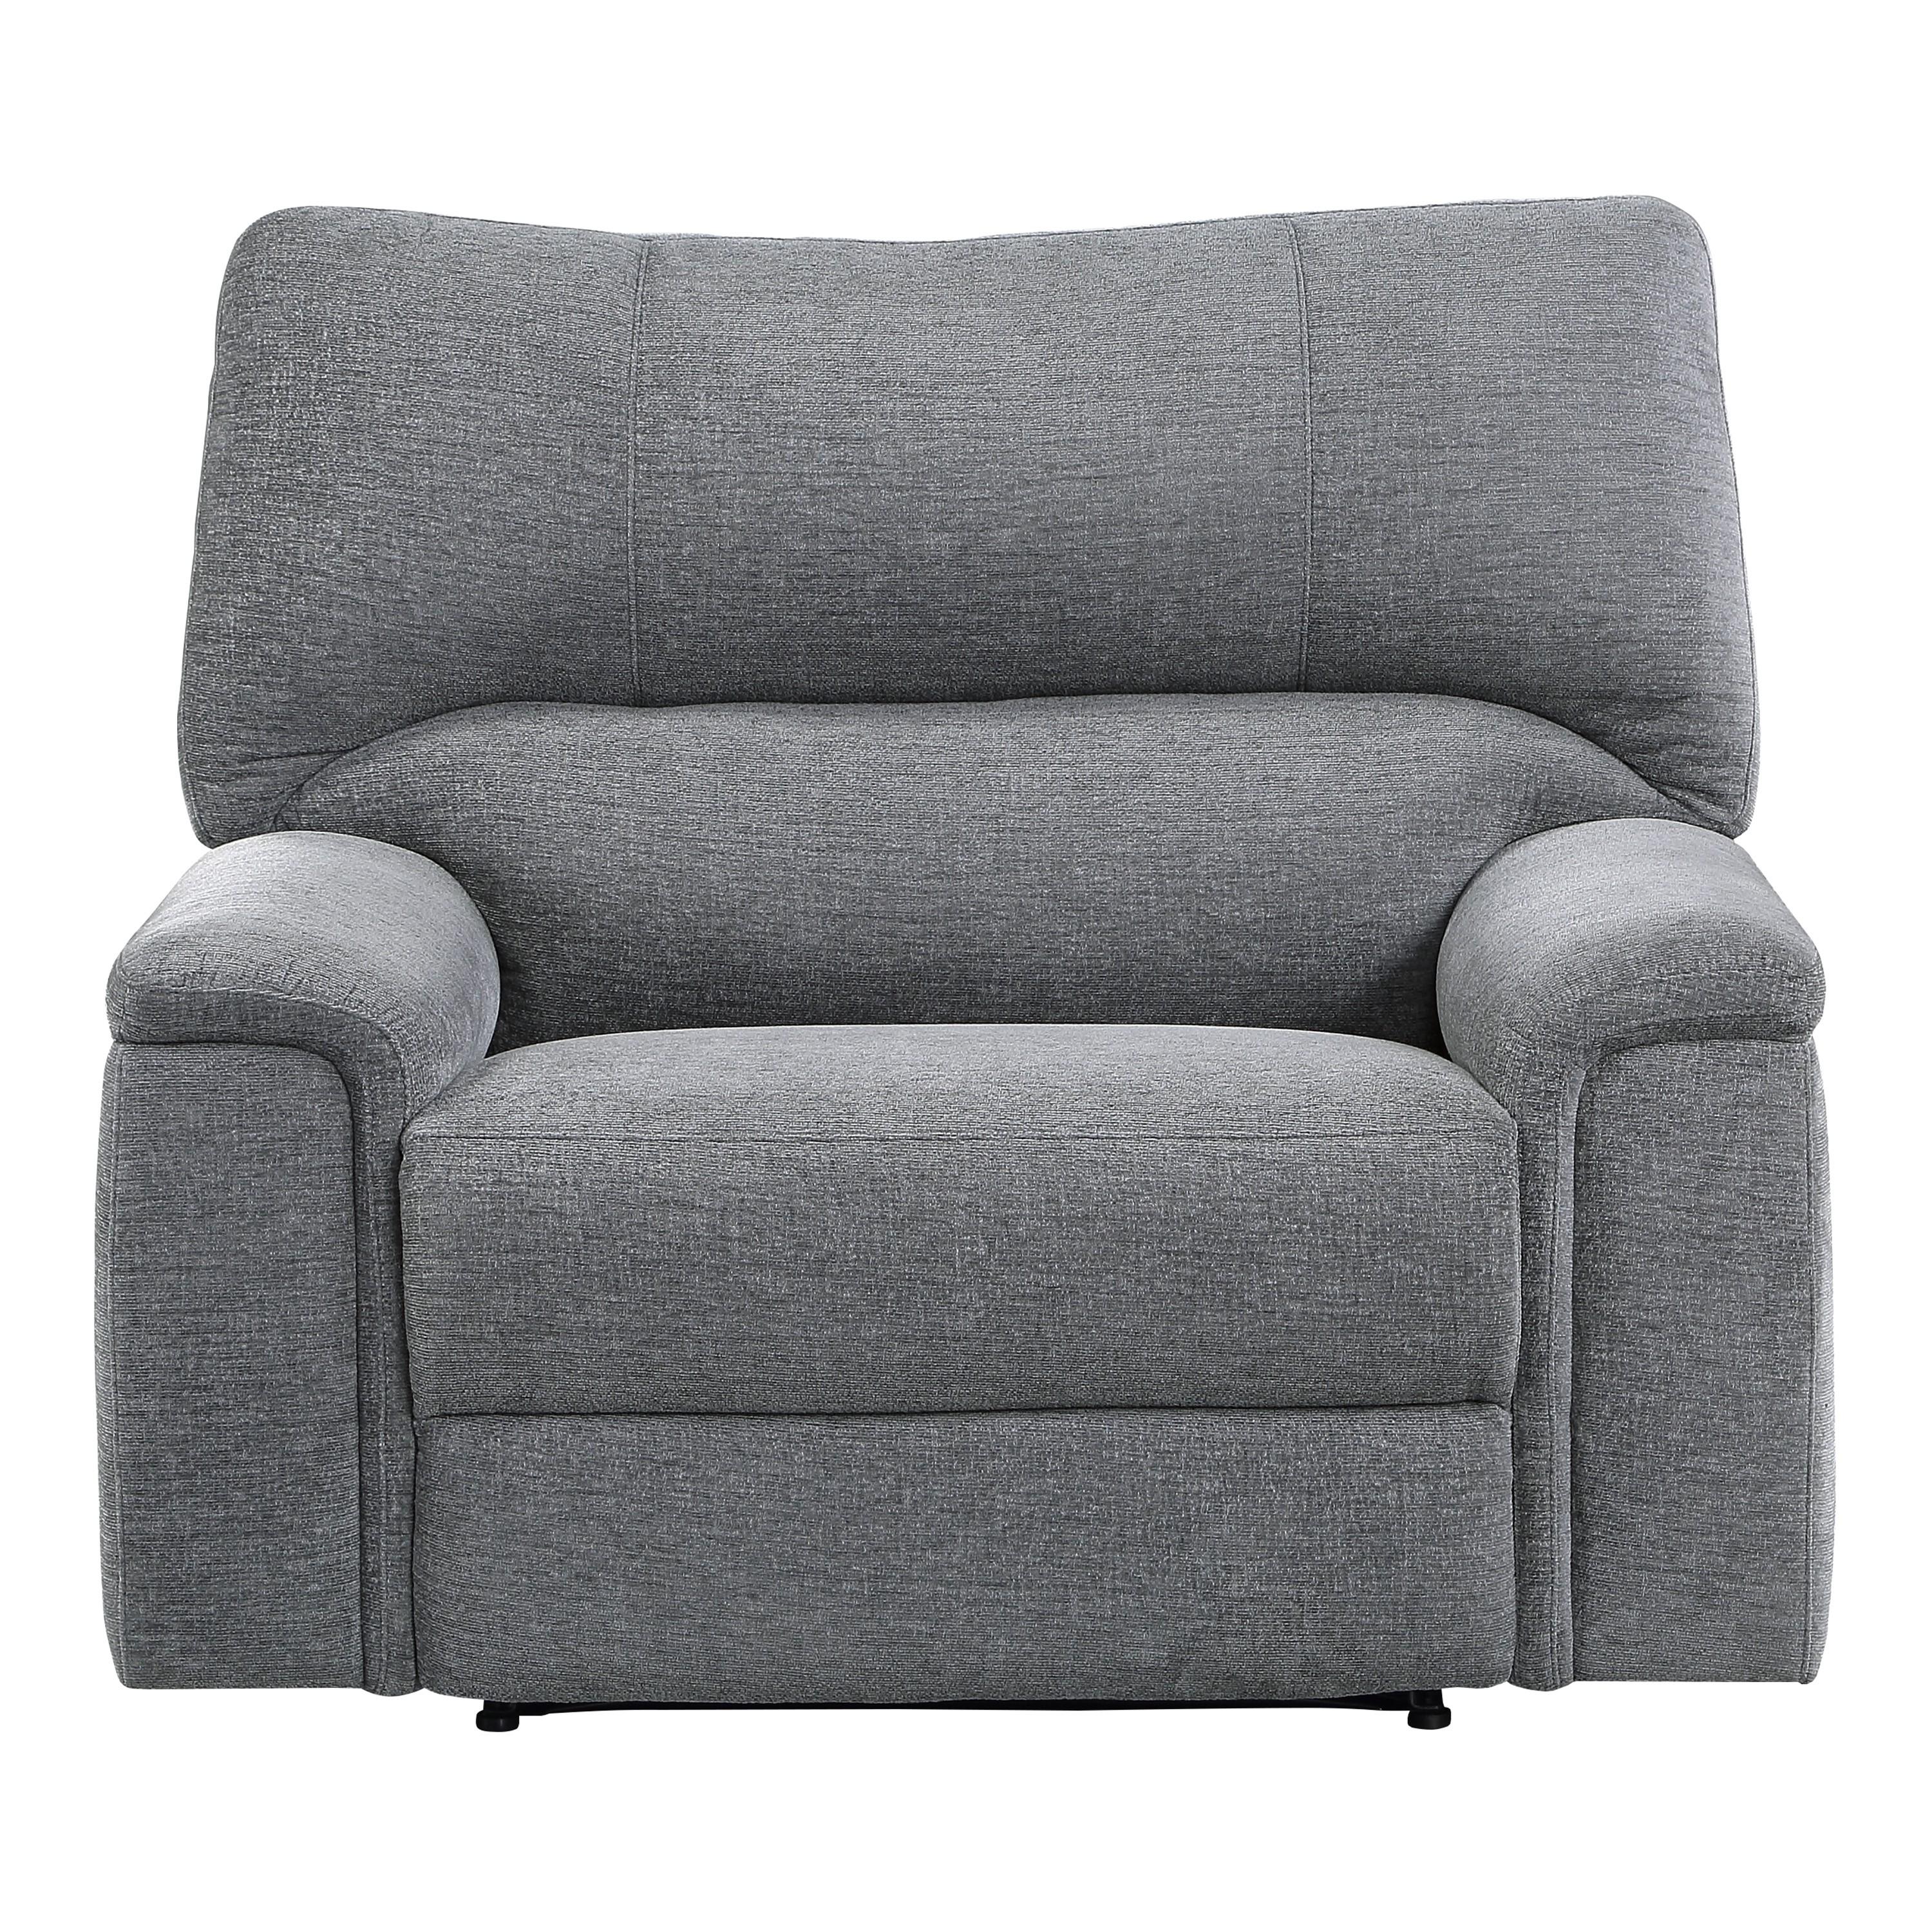 Transitional Reclining Chair 9413CC-1 Dickinson 9413CC-1 in Charcoal Chenille